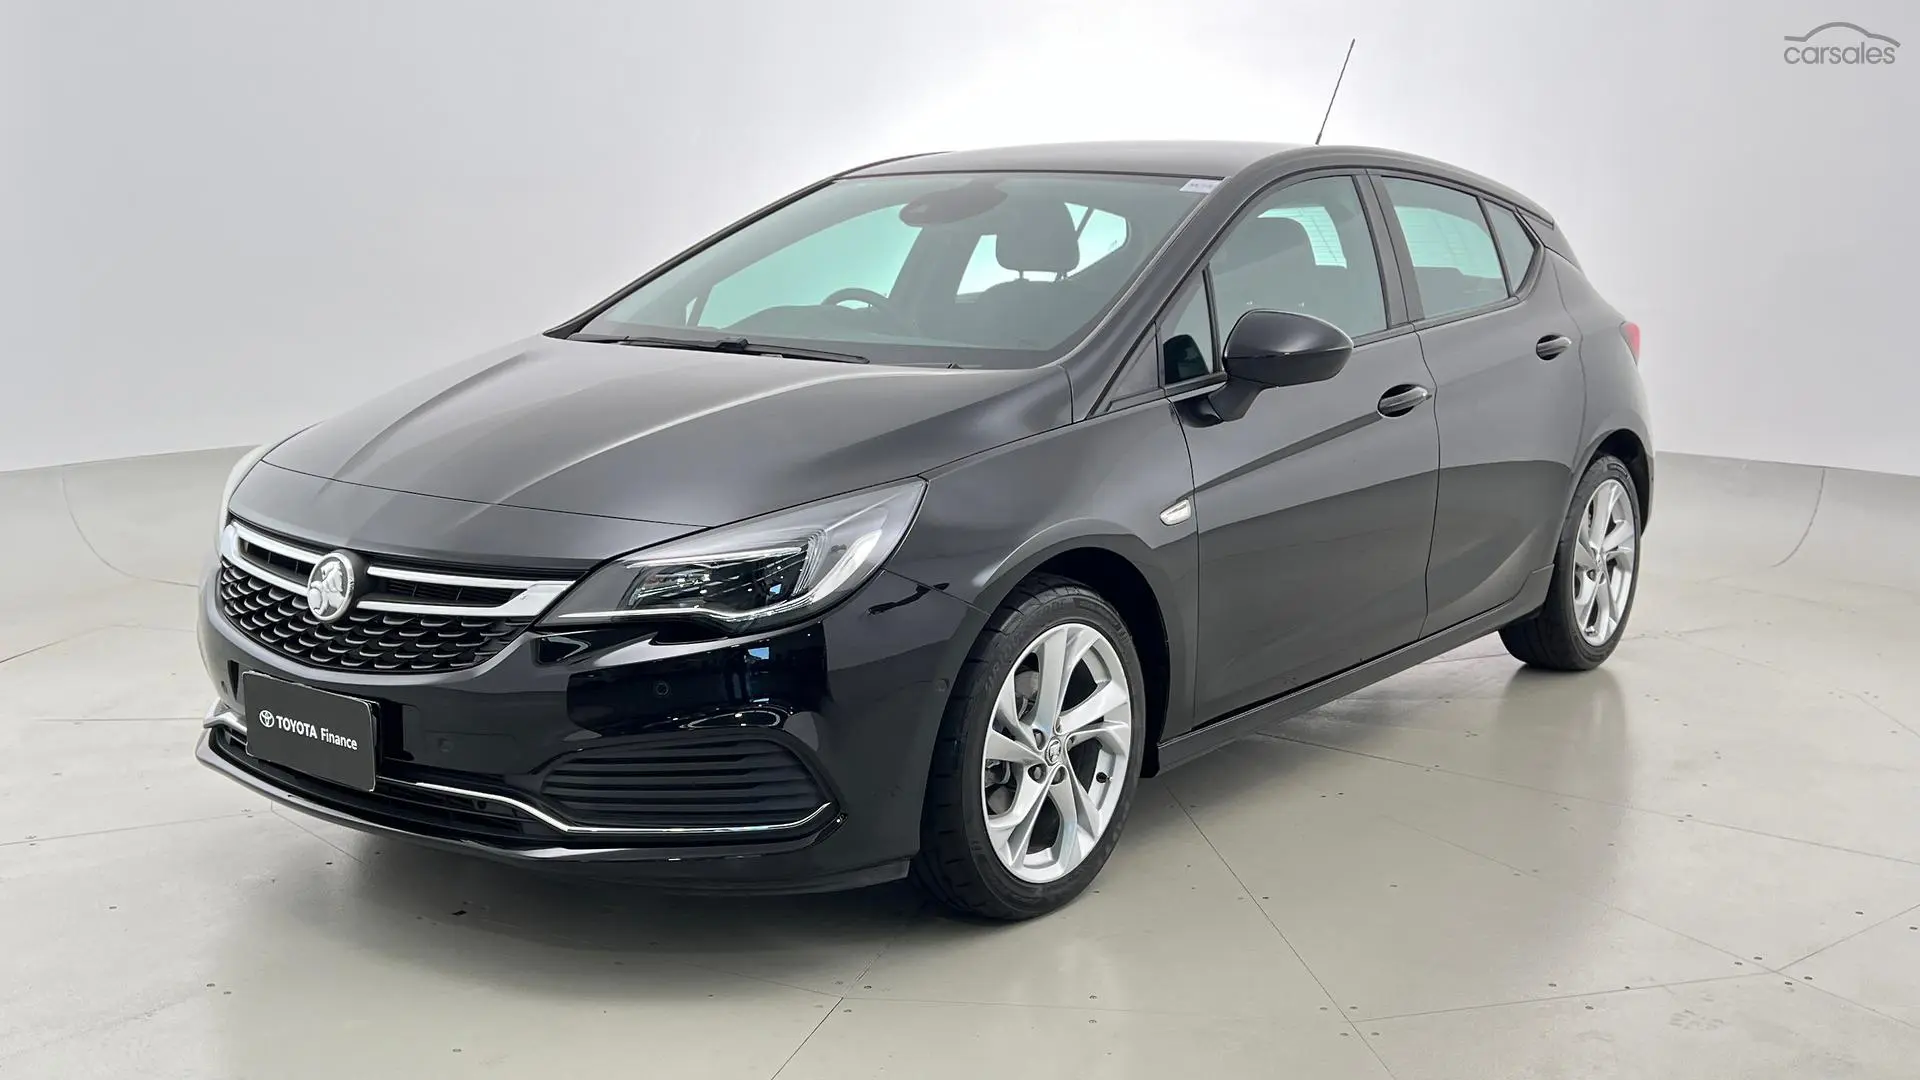 2017 Holden Astra Image 8